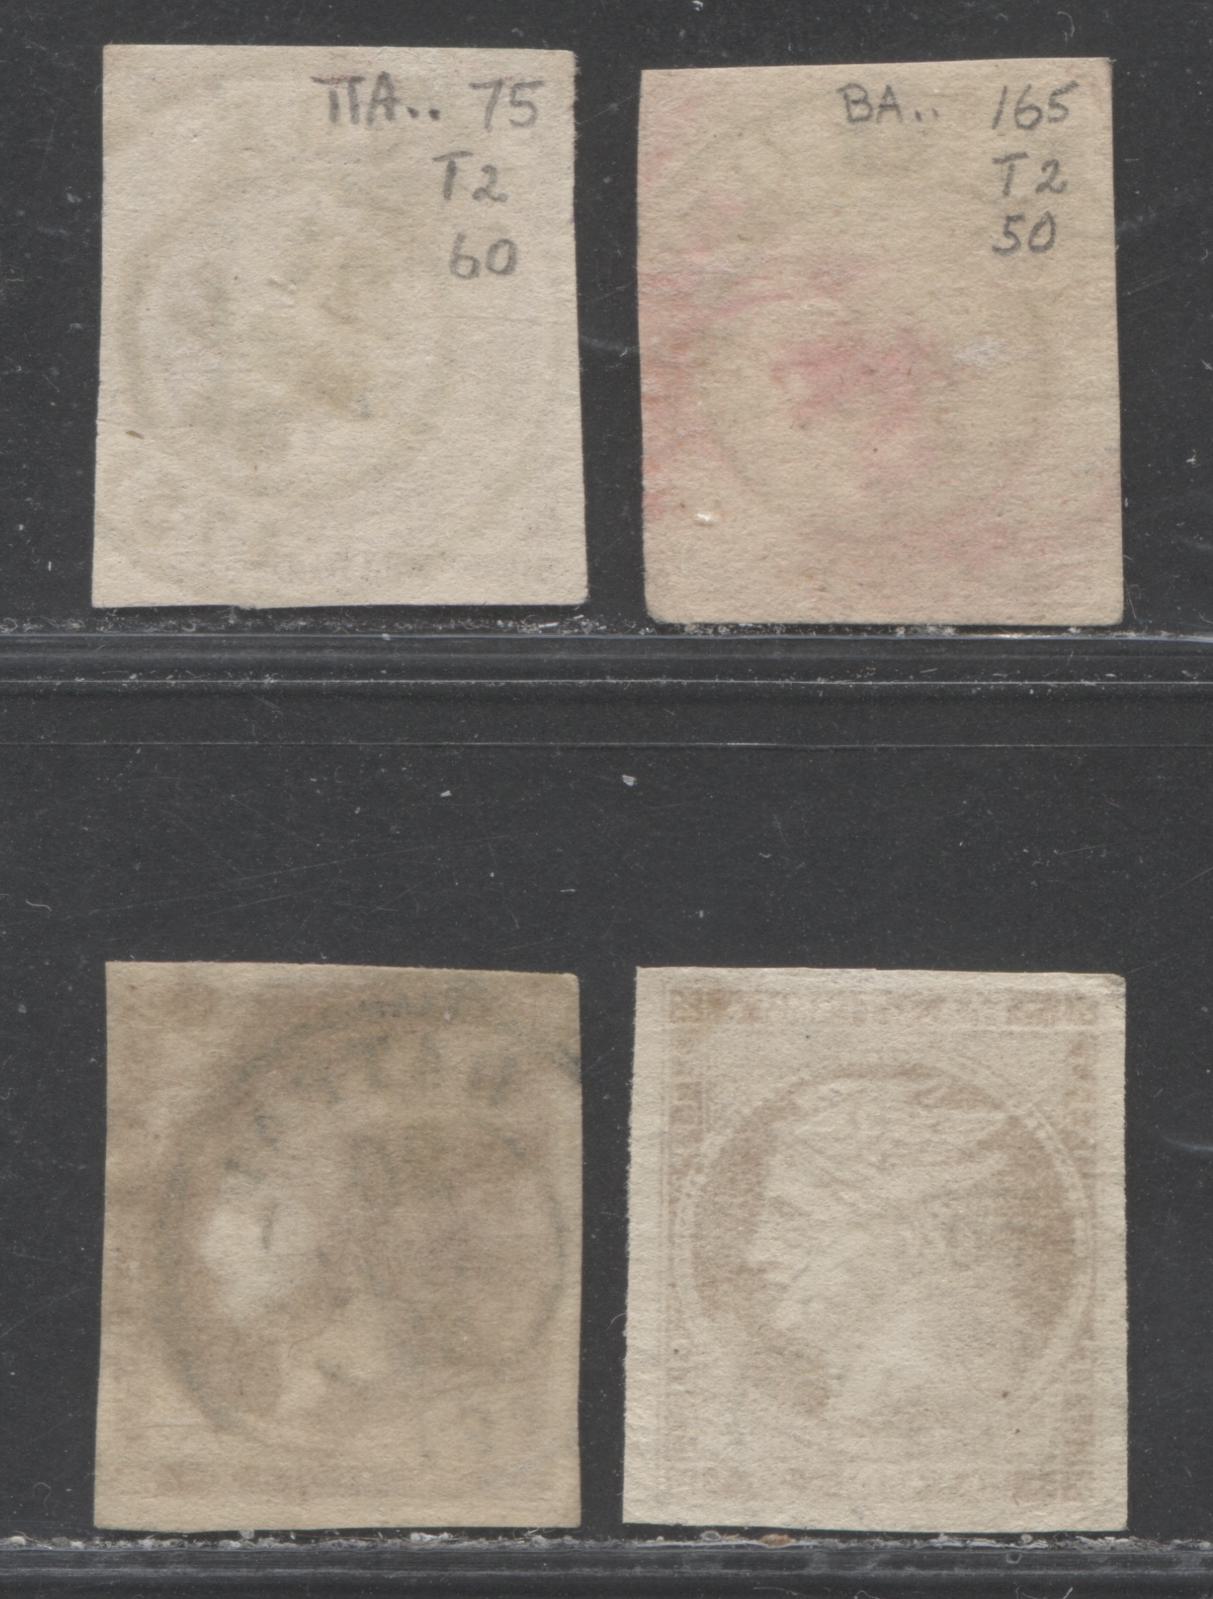 Lot 96 Greece SC#56b 20l Deep Carmine On Cream Paper, No Control Number 1880-1886 Large Hermes Head Issue, 1882 CDS Cancels, 4 Fine Used Examples, Click on Listing to See ALL Pictures, Estimated Value $35 USD